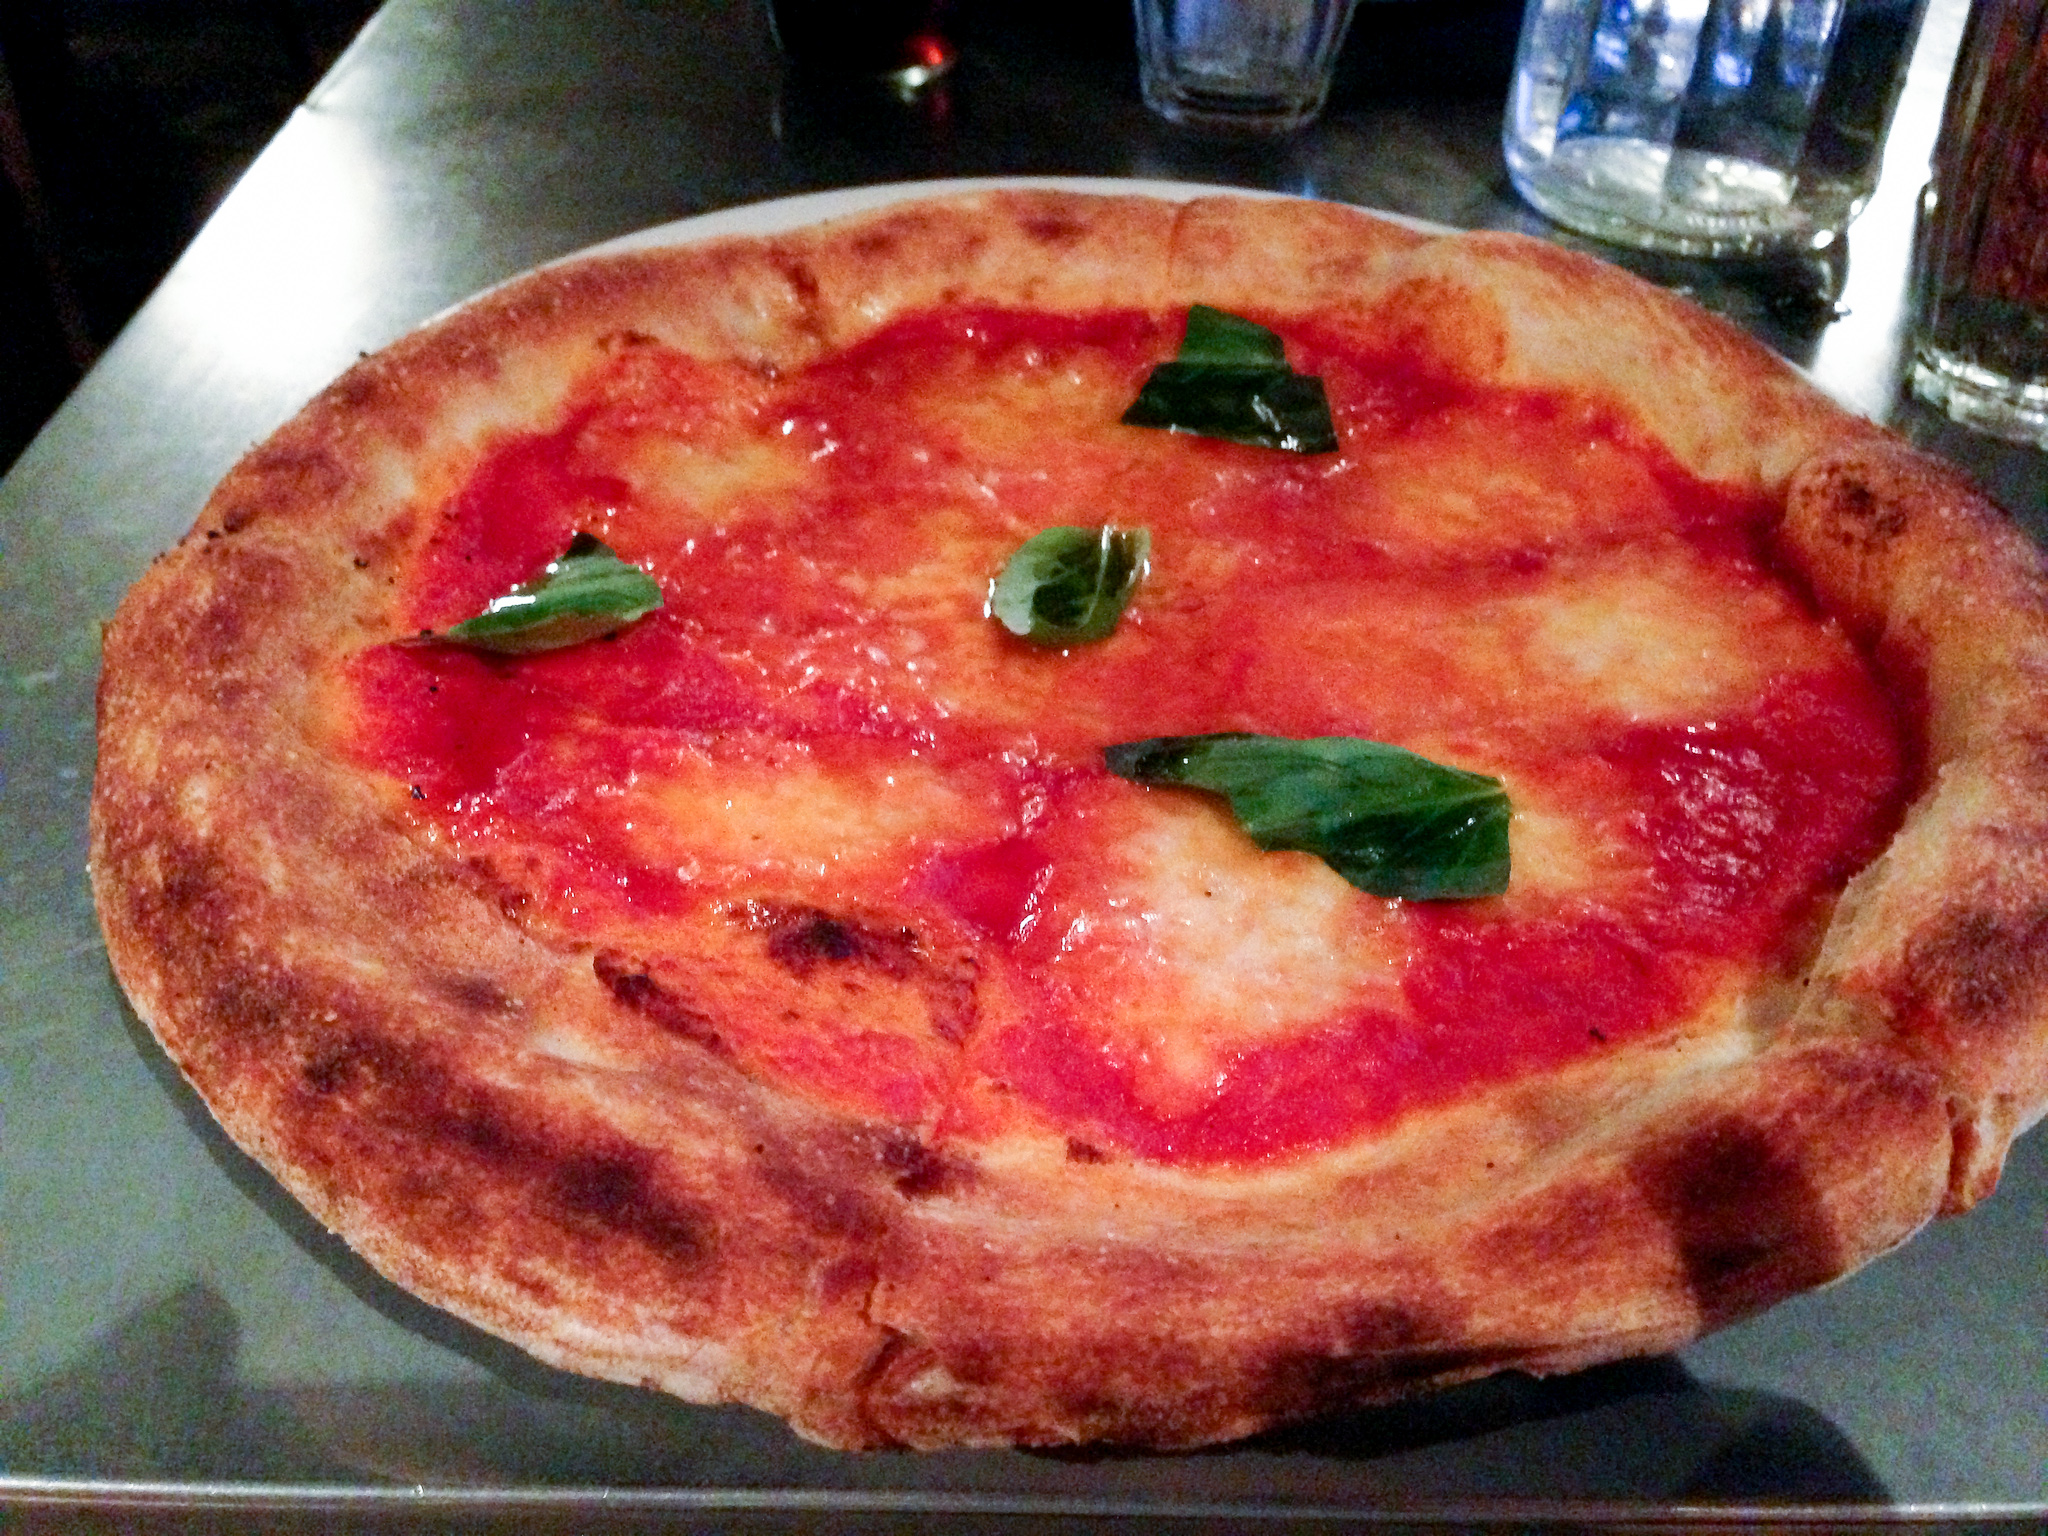 Margherita at Pizza East in London. Photo by alphacityguides.